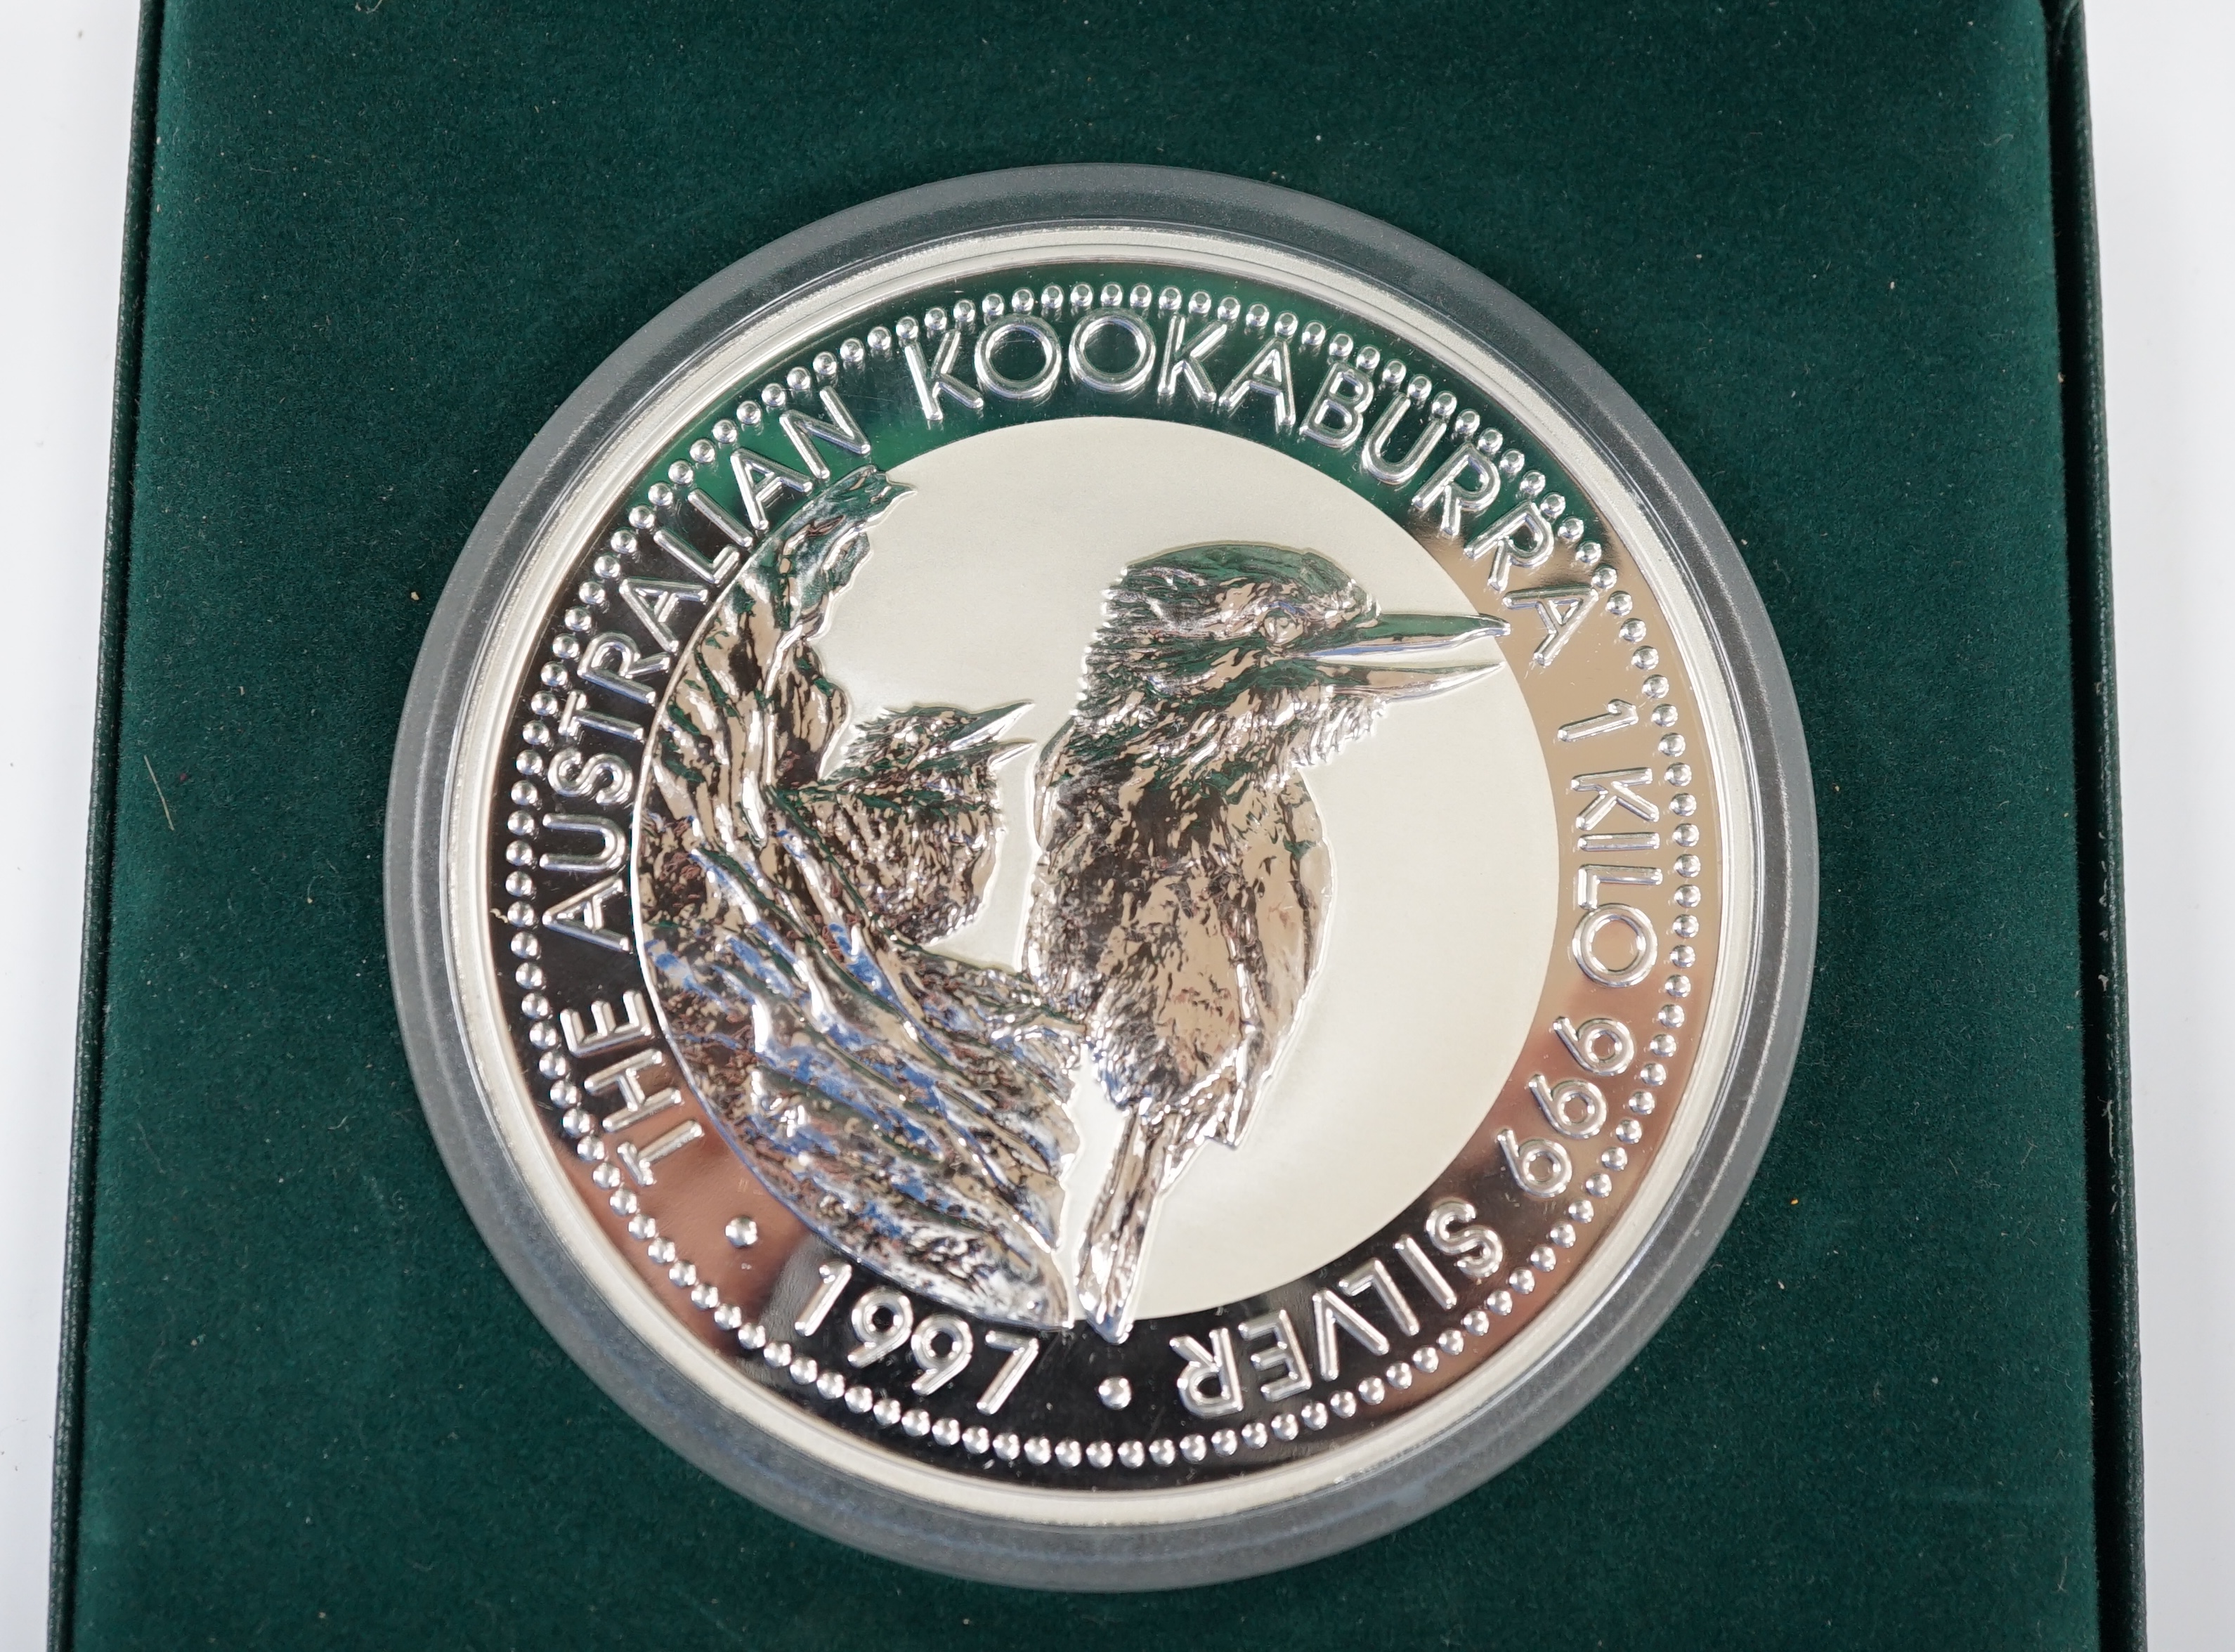 Australia coins, 999 standard silver 1kg kookaburra $30 coin, cased with certificate